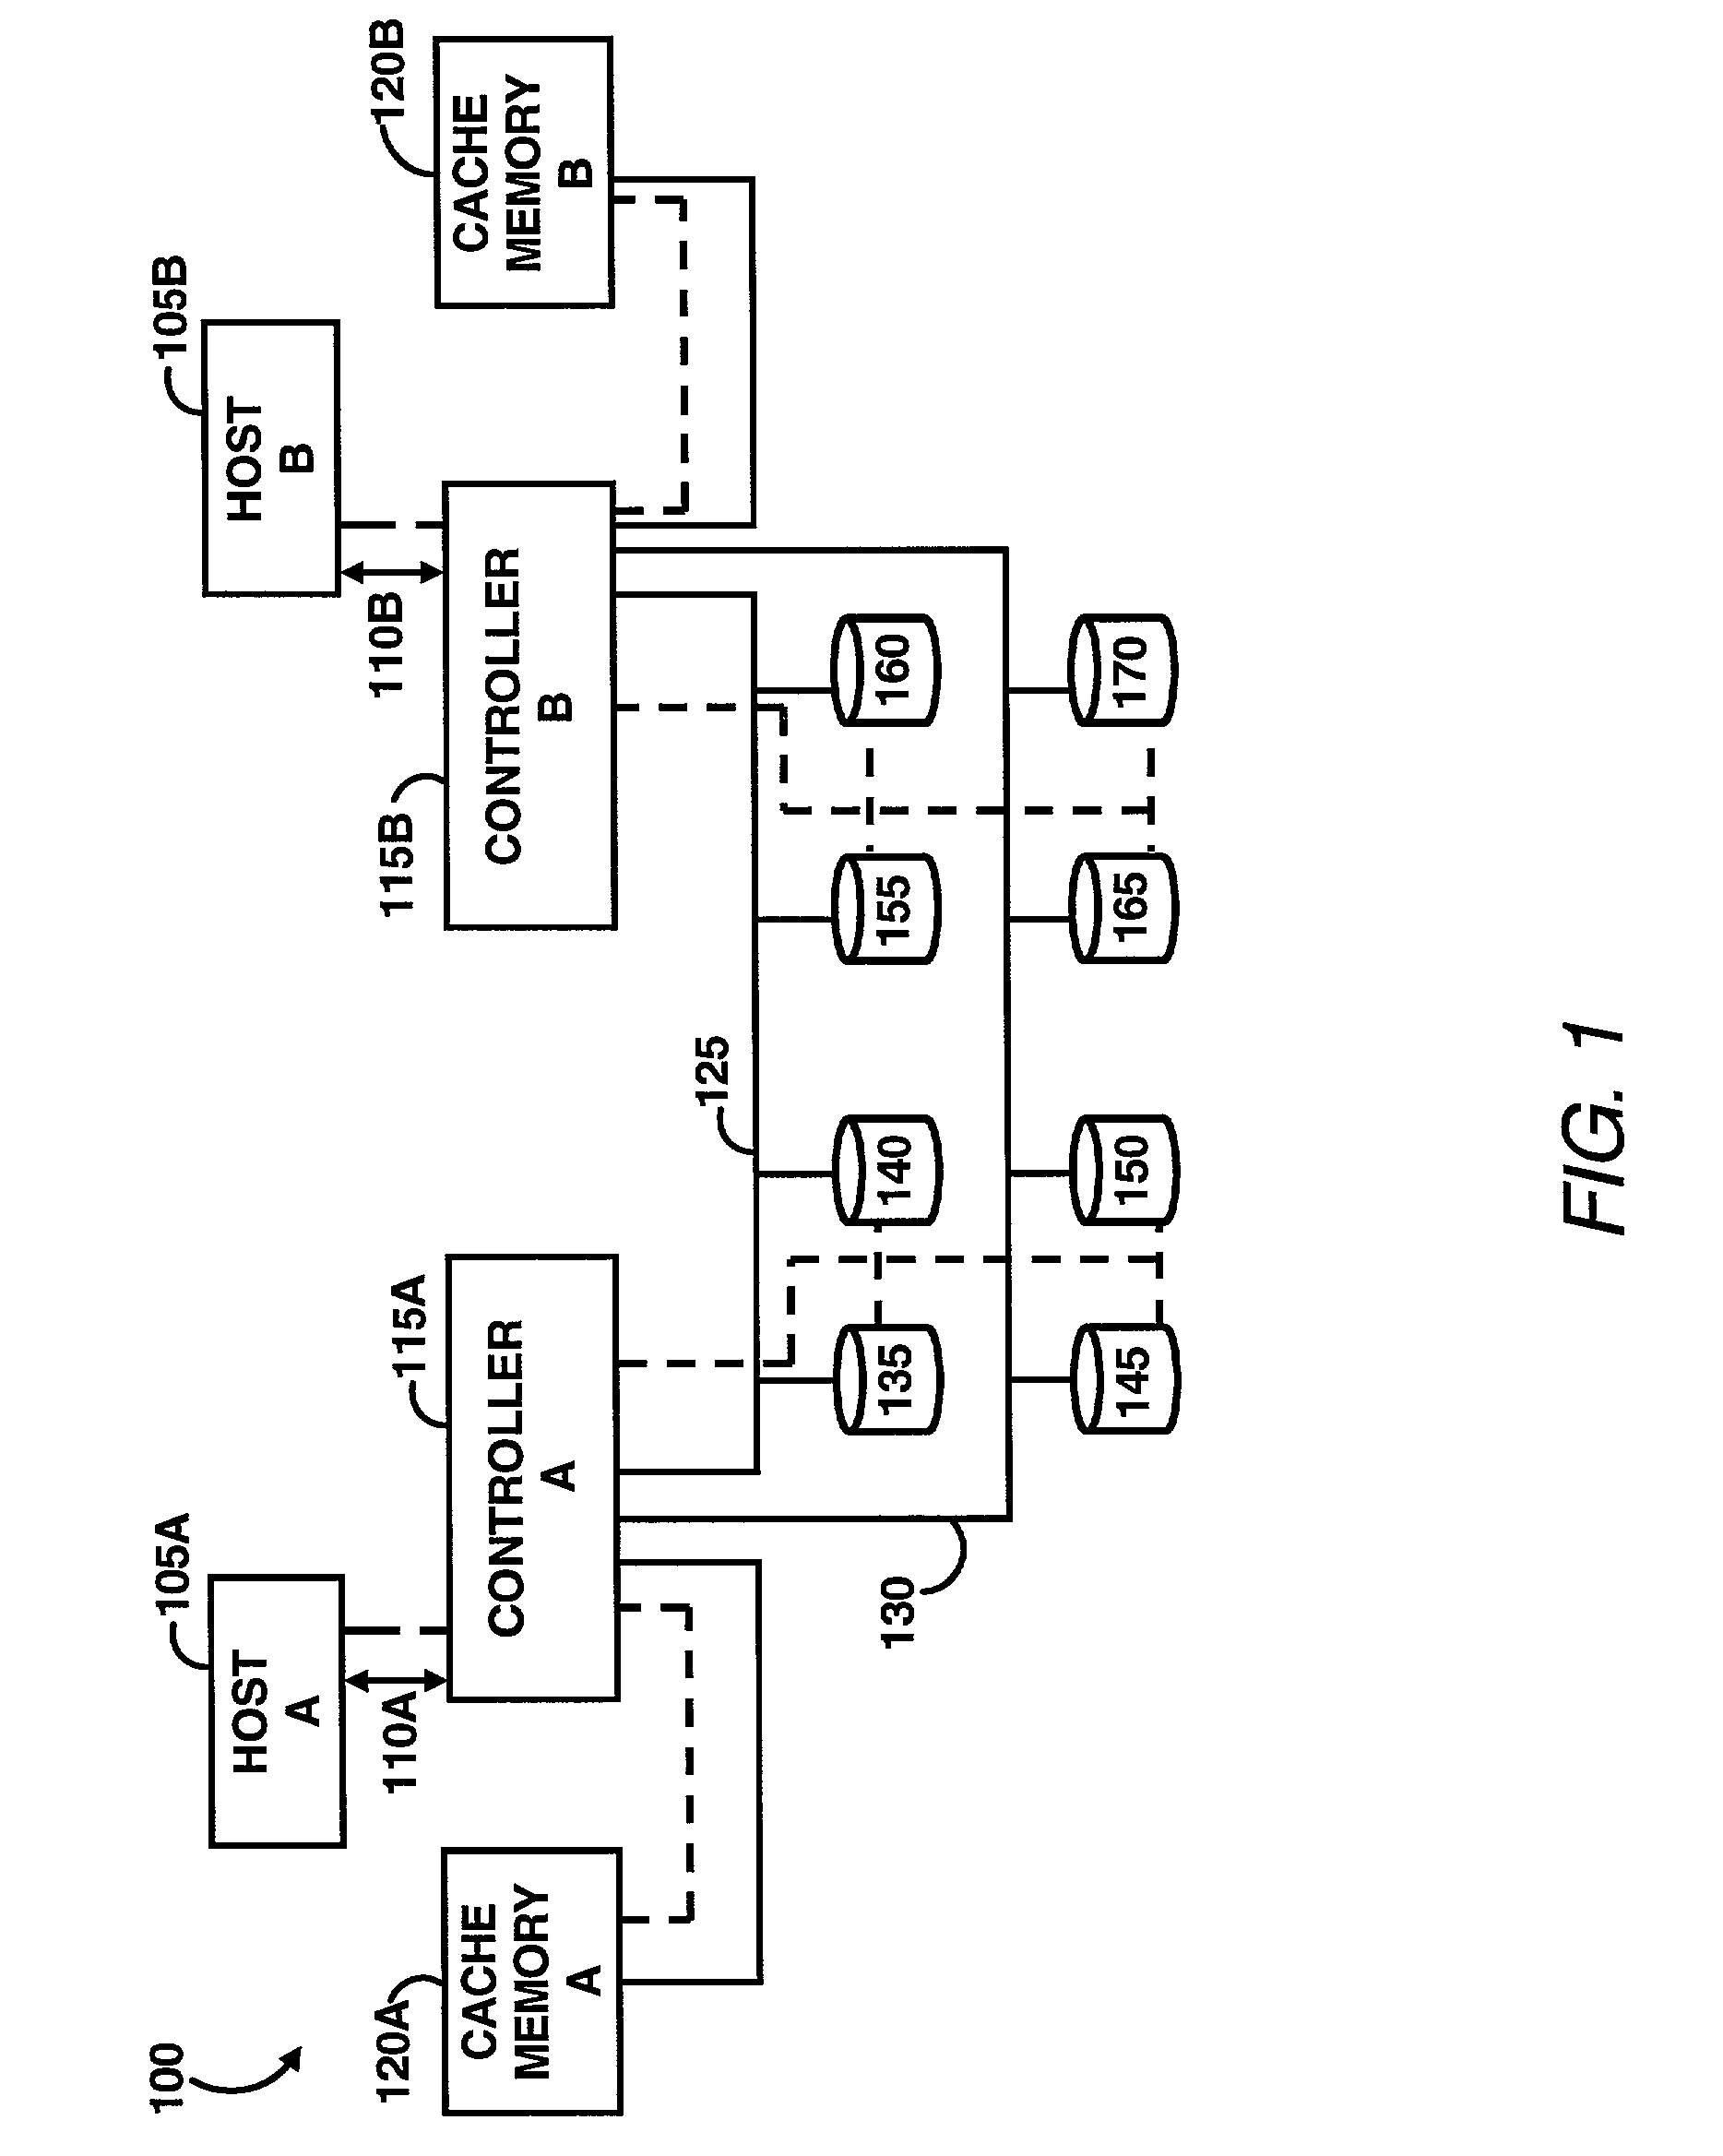 Method and apparatus for morphological modeling of complex systems to predict performance